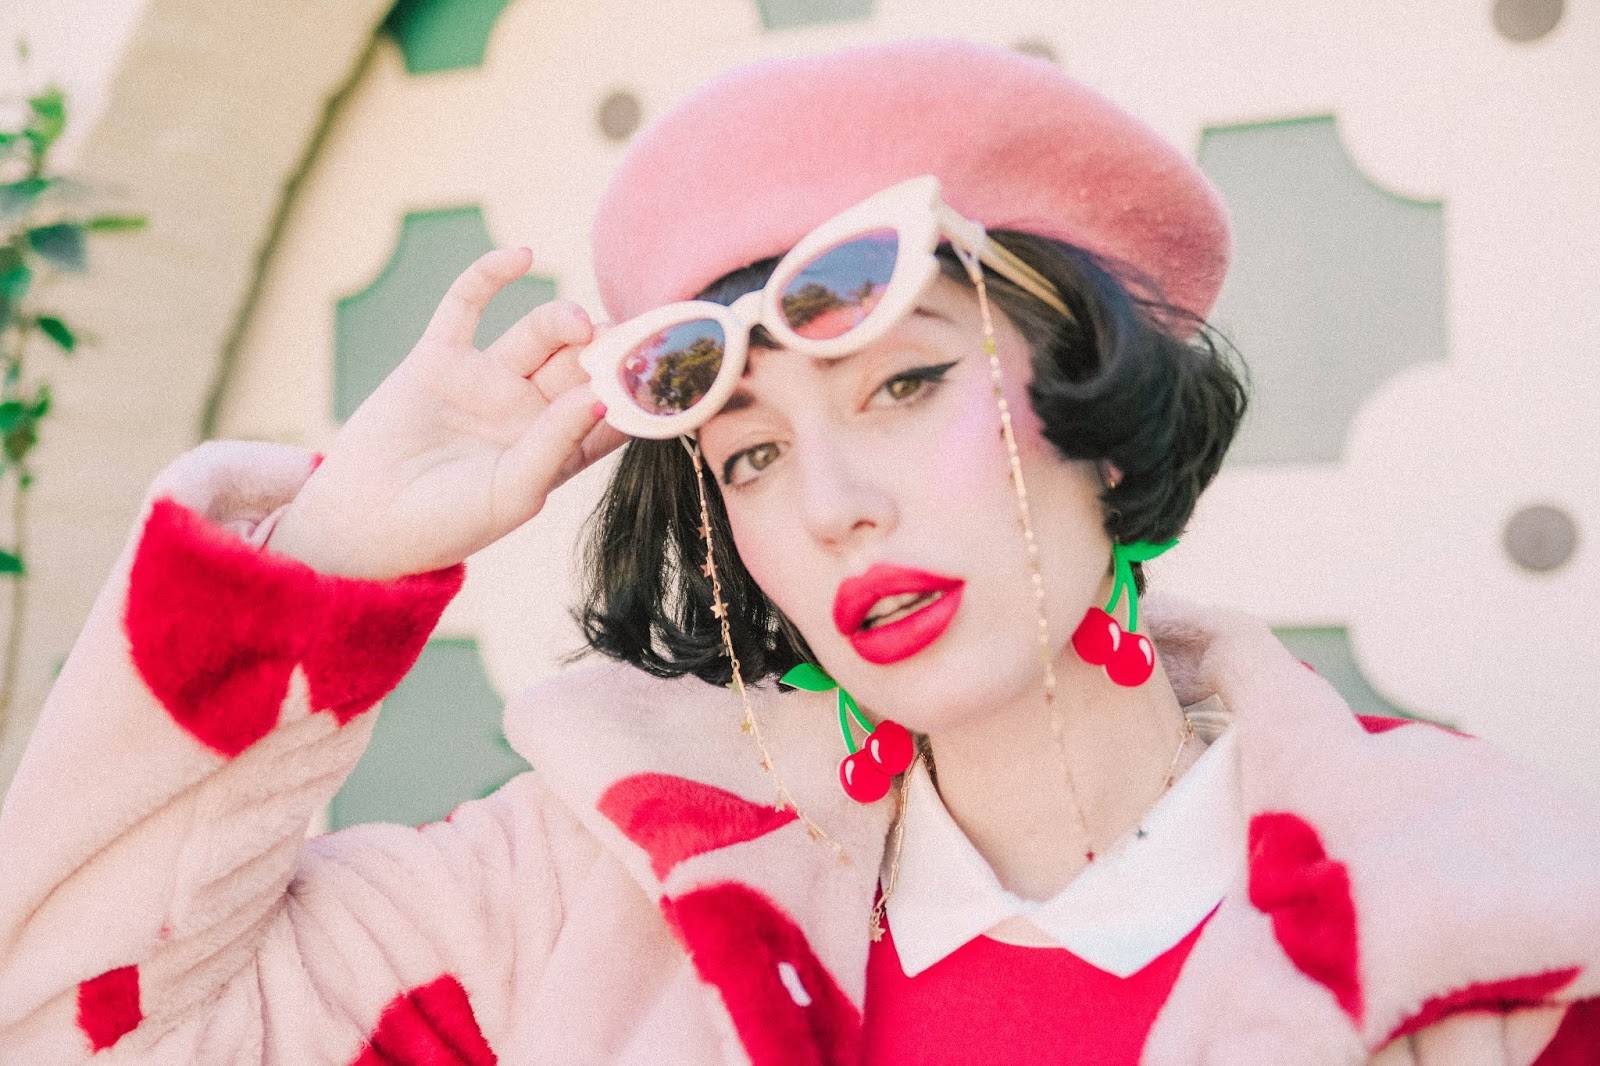 Red Dots - A Fashion Nerd, A Colorful Fashion Blogger in Los Angeles